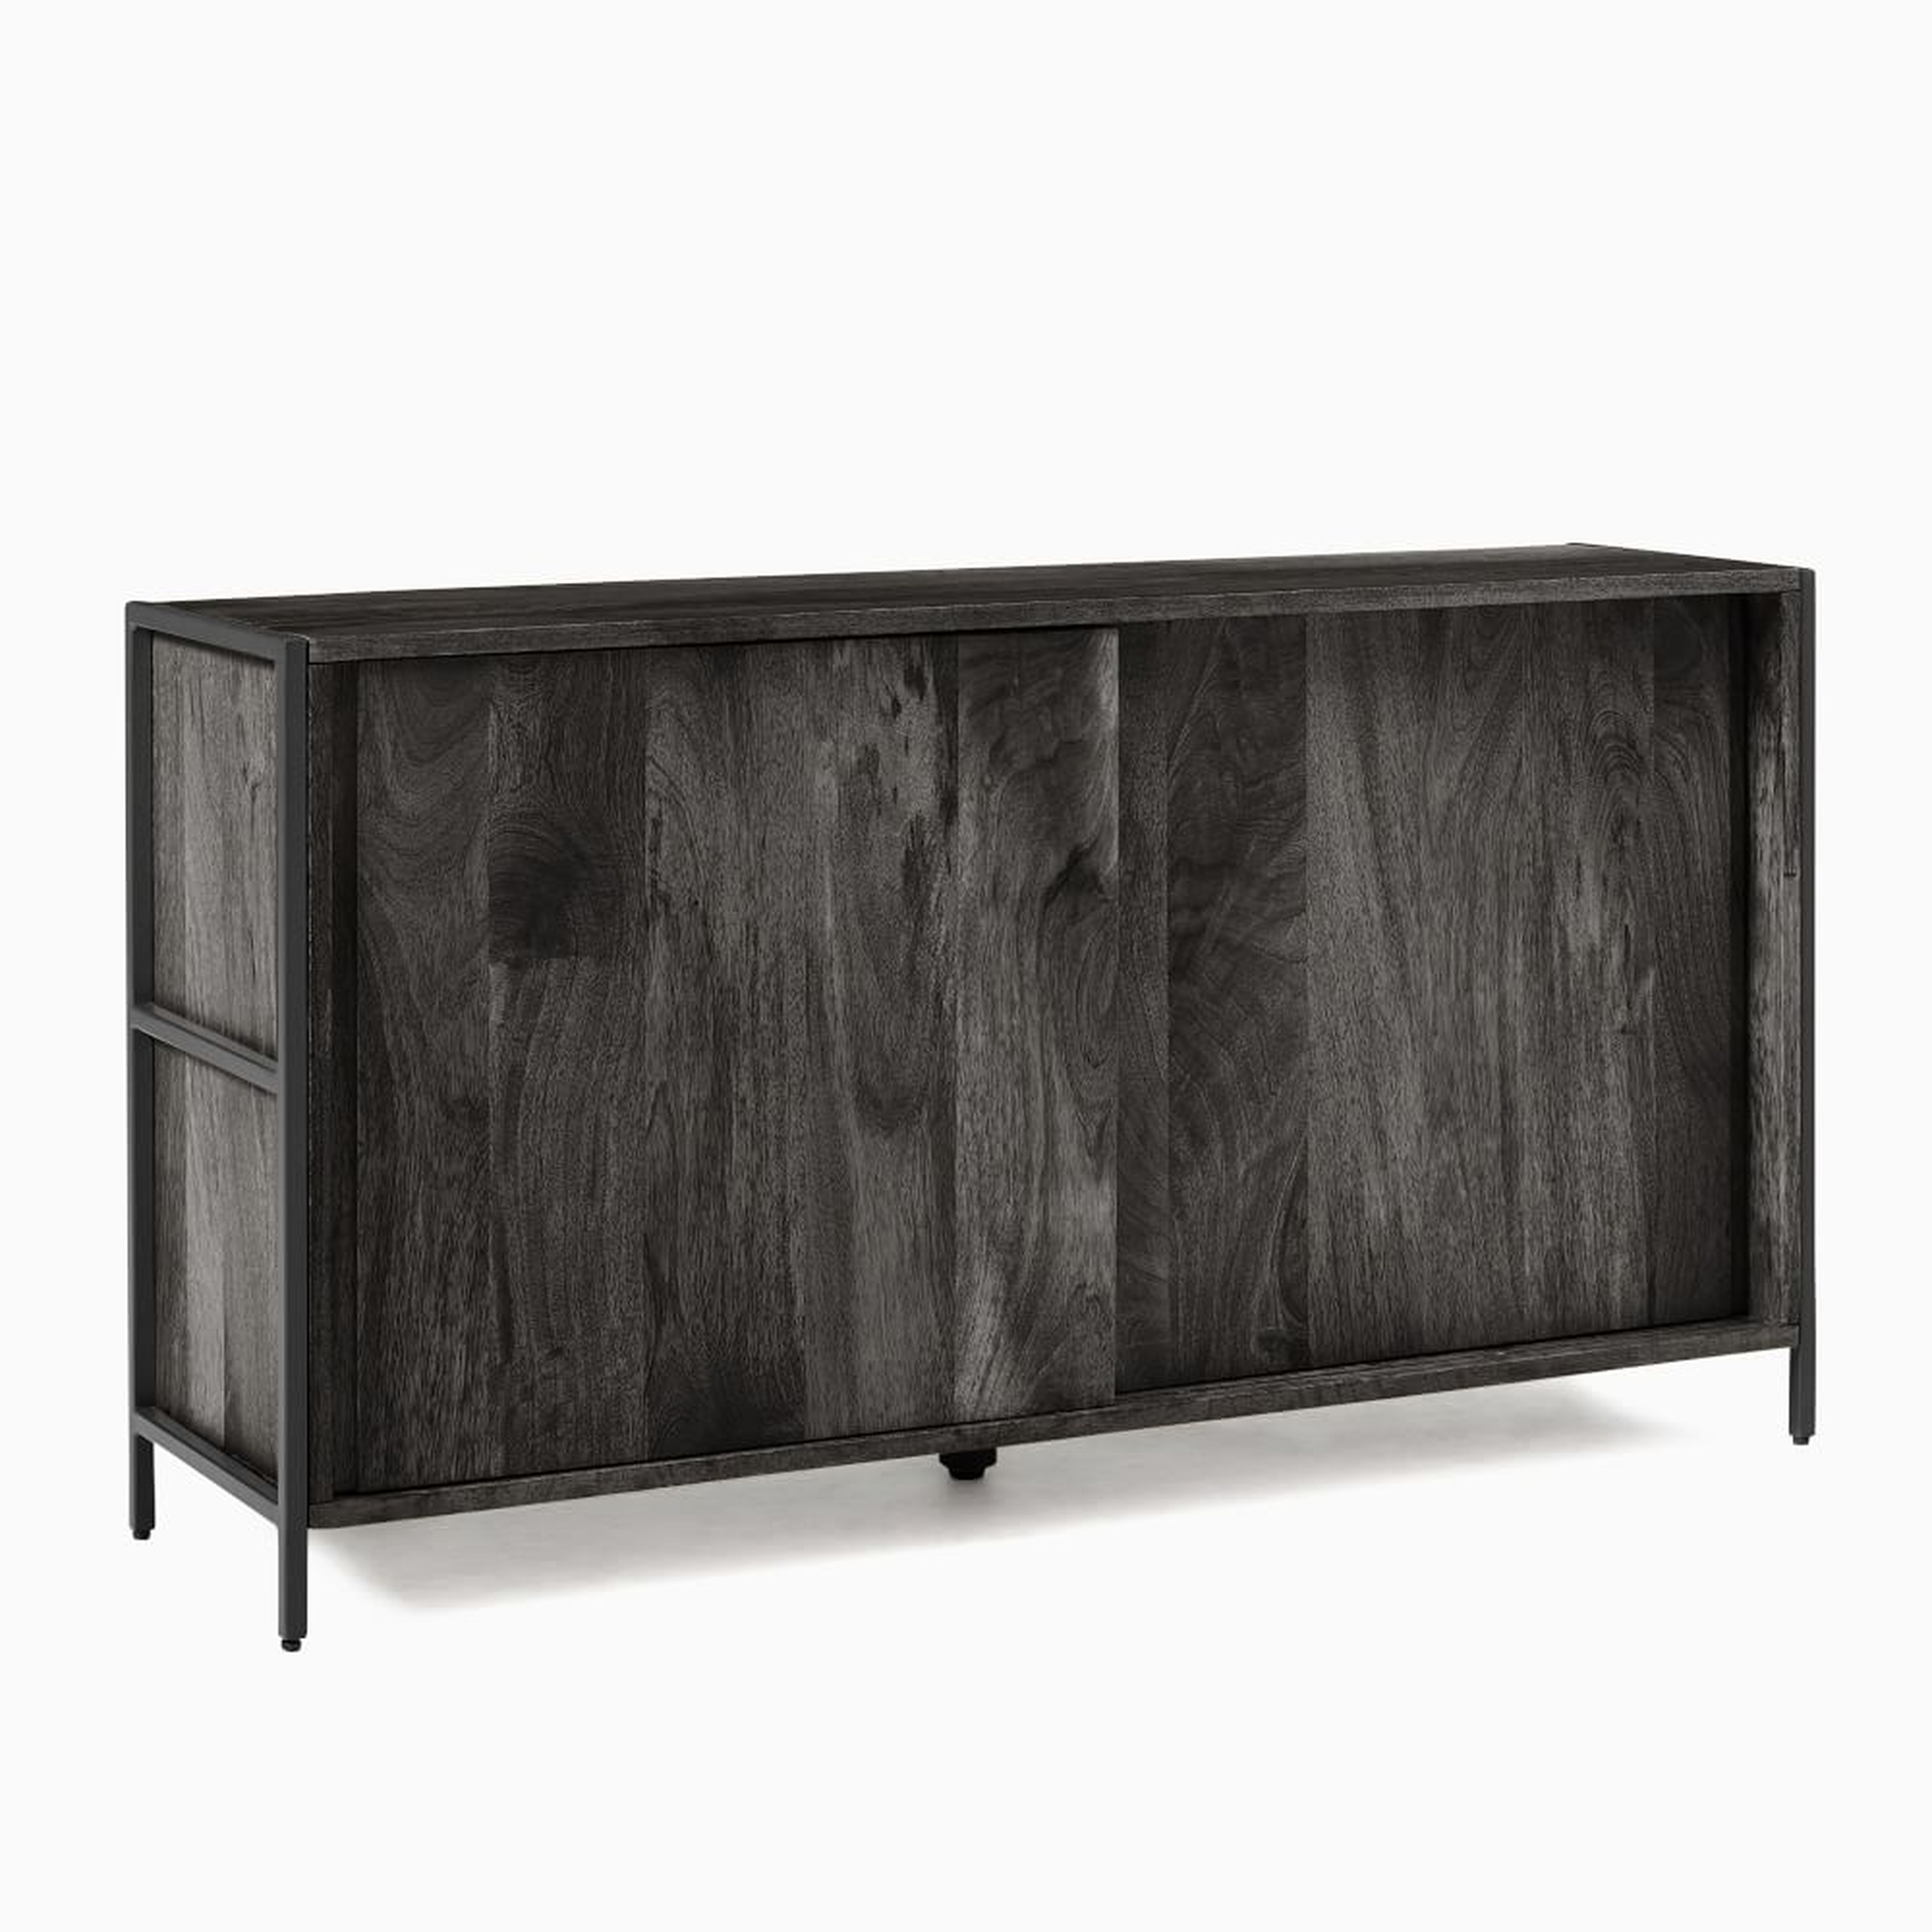 We Industrial Storage Collection Black Industrial Shallow Media - West Elm